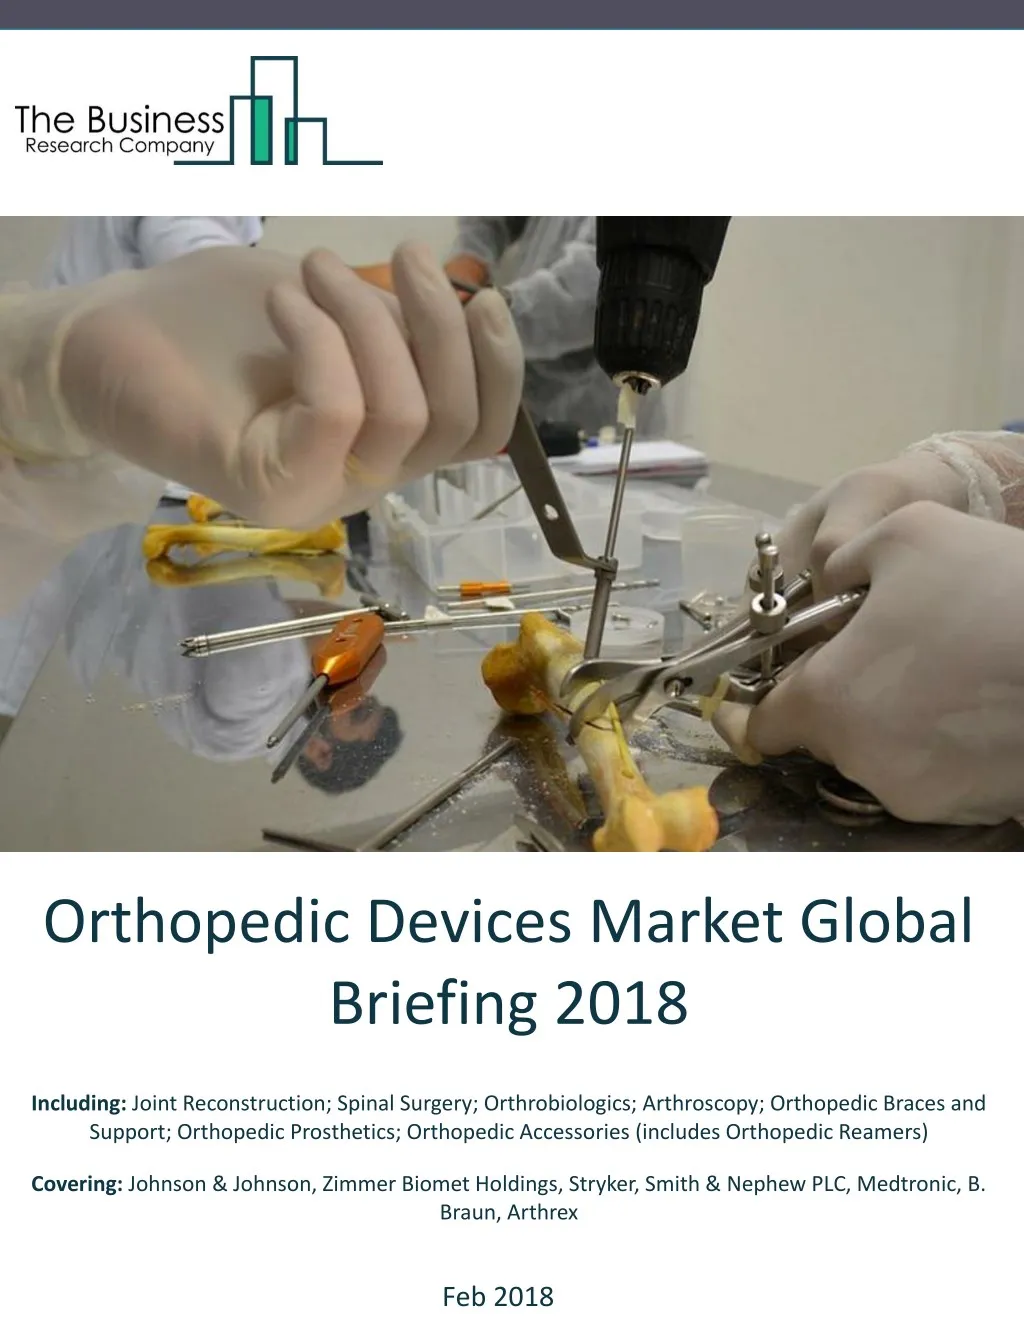 orthopedic devices market global briefing 2018